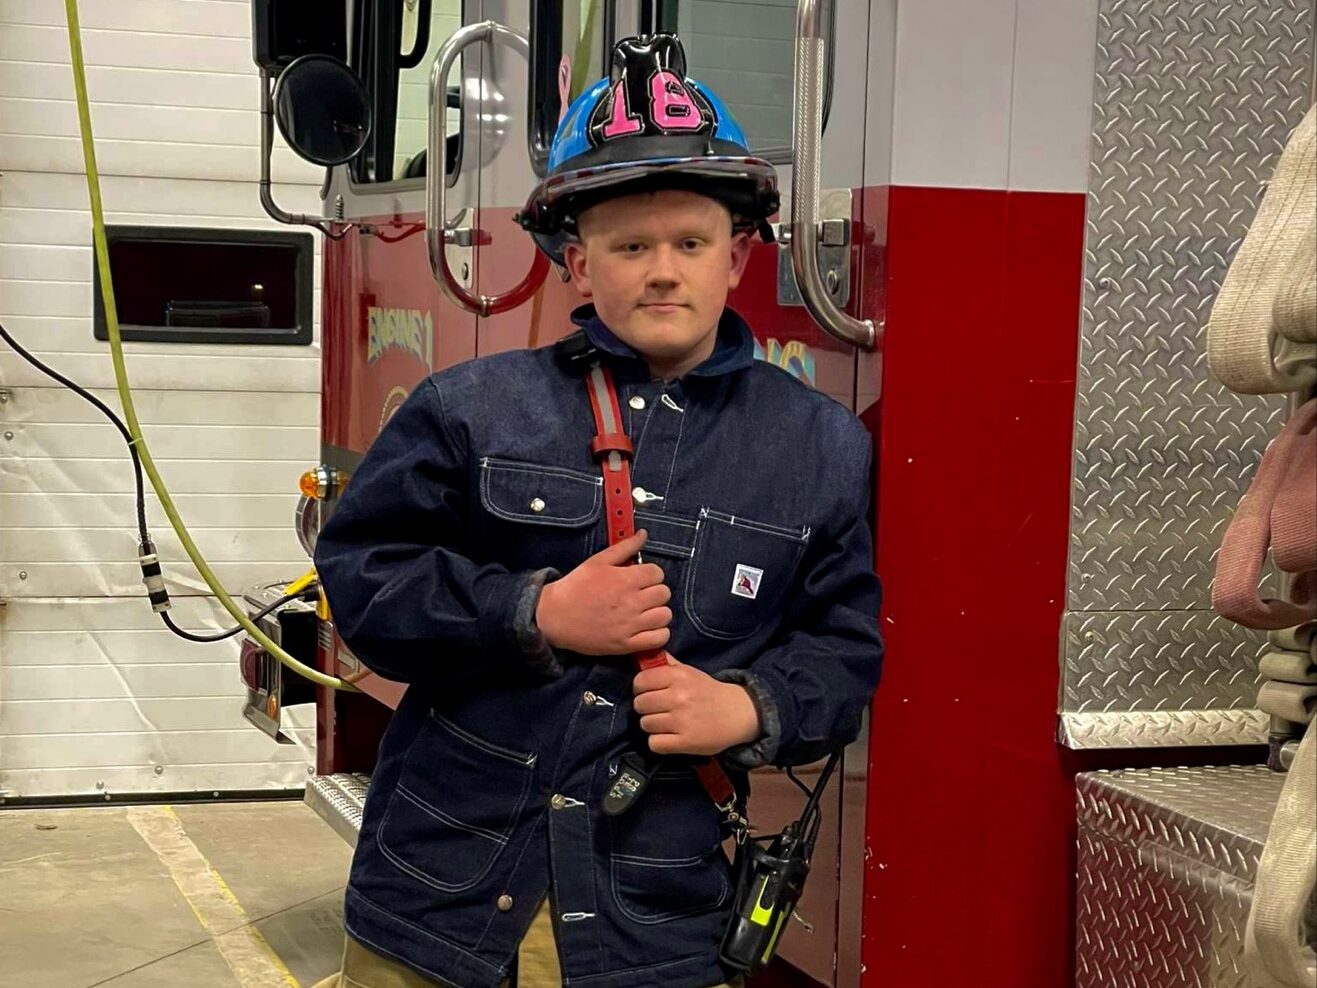 A young man in a firefighter uniform standing next to a fire truck.